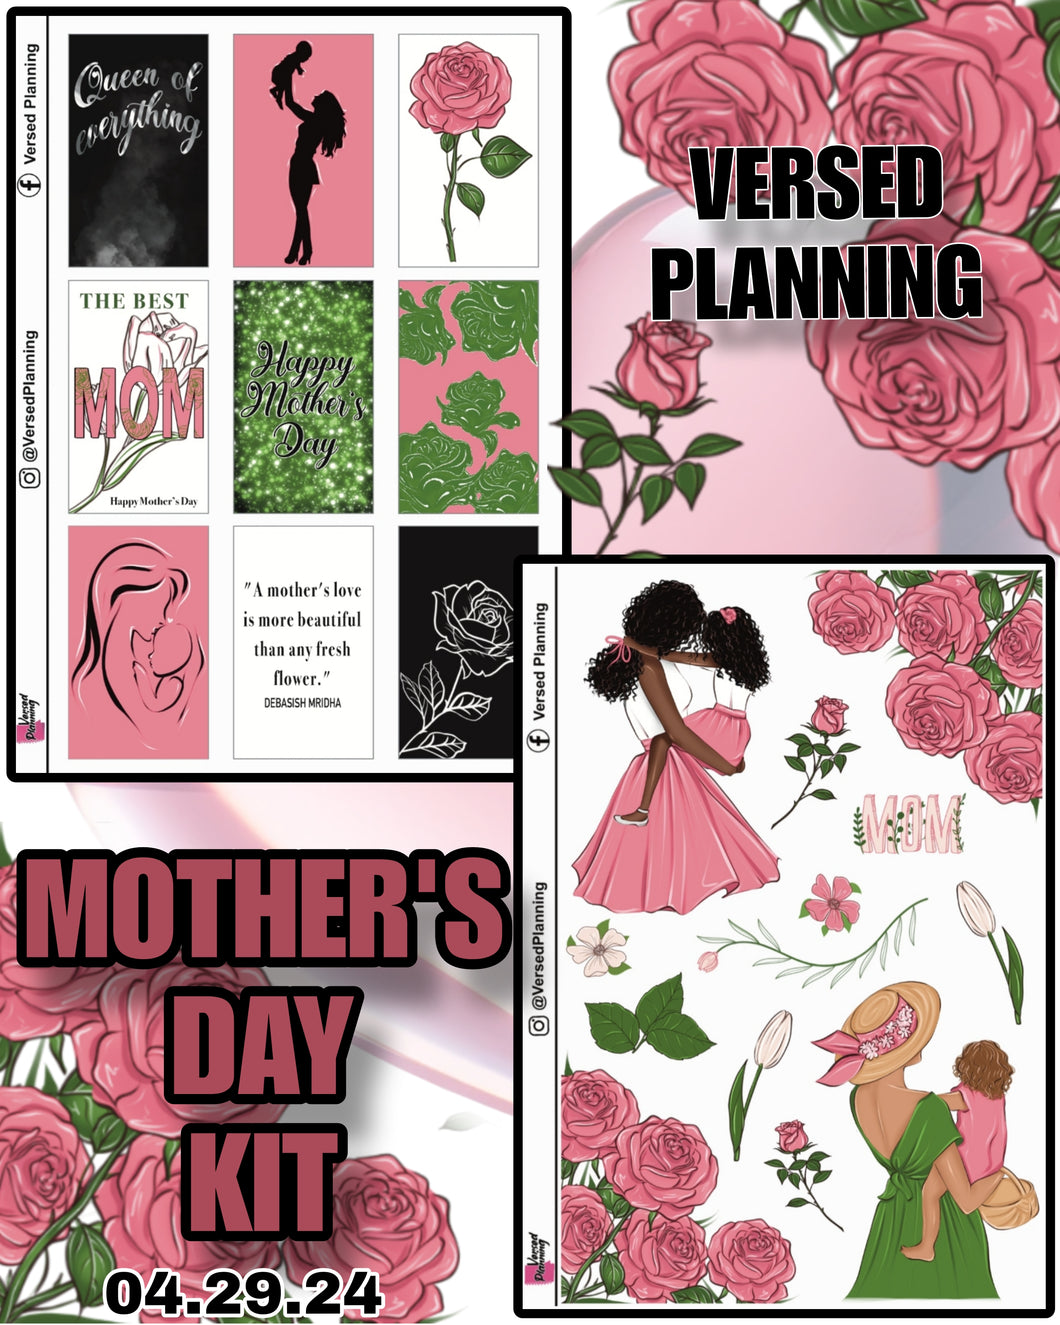 MOTHER'S DAY 2 PAGE KIT